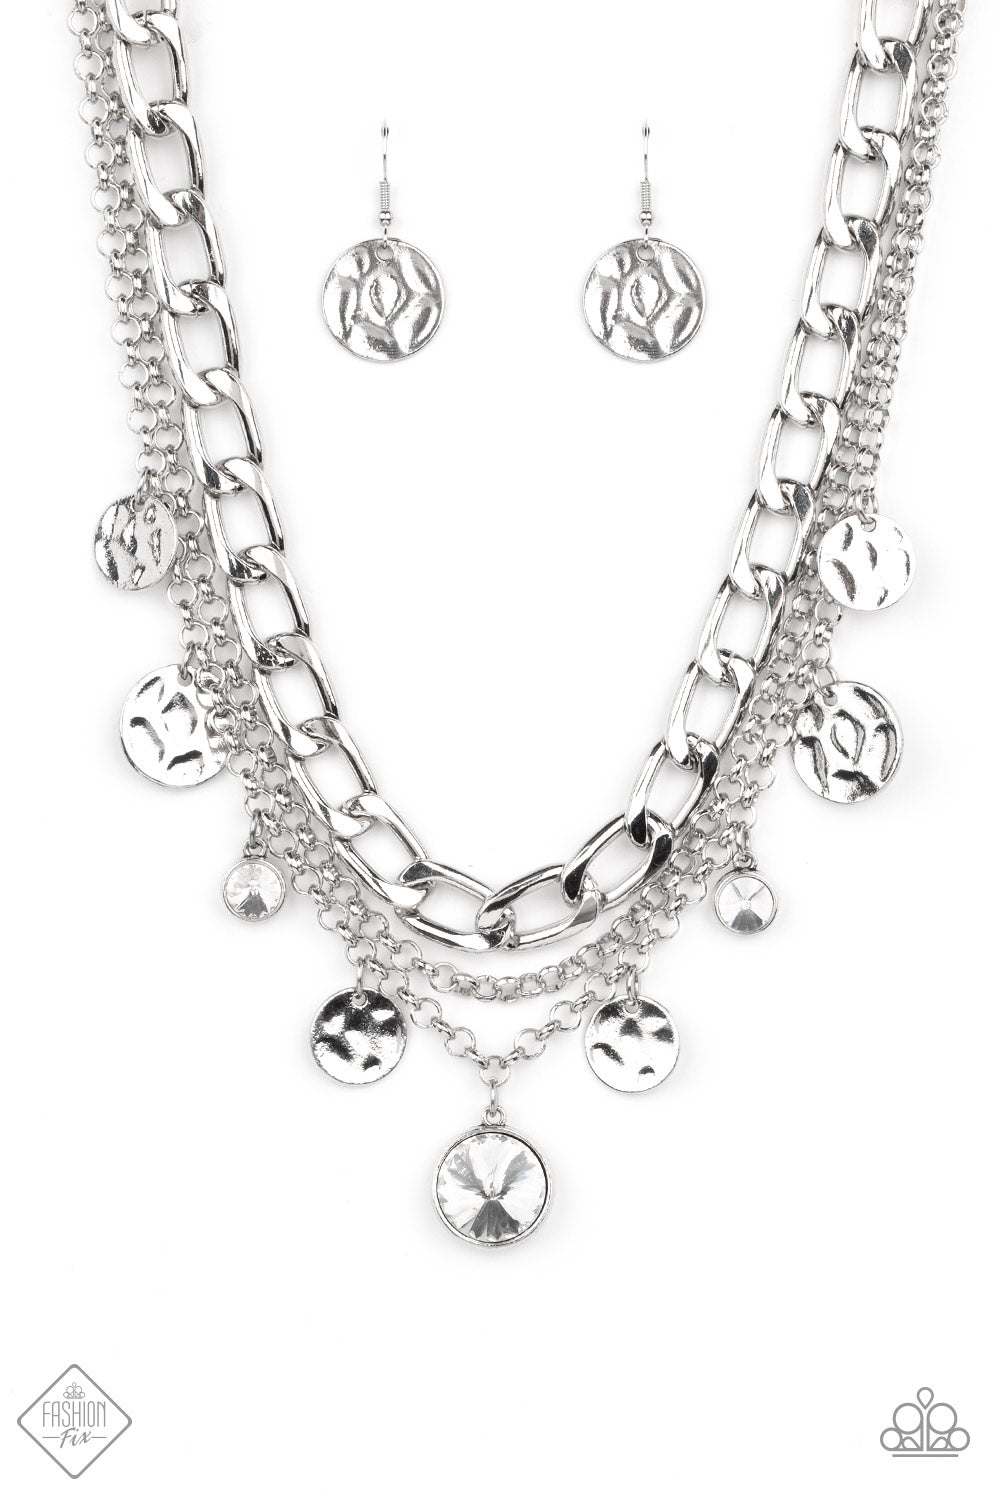 Industrial Noise - White (Rhinestone) Necklace (MM-0922)